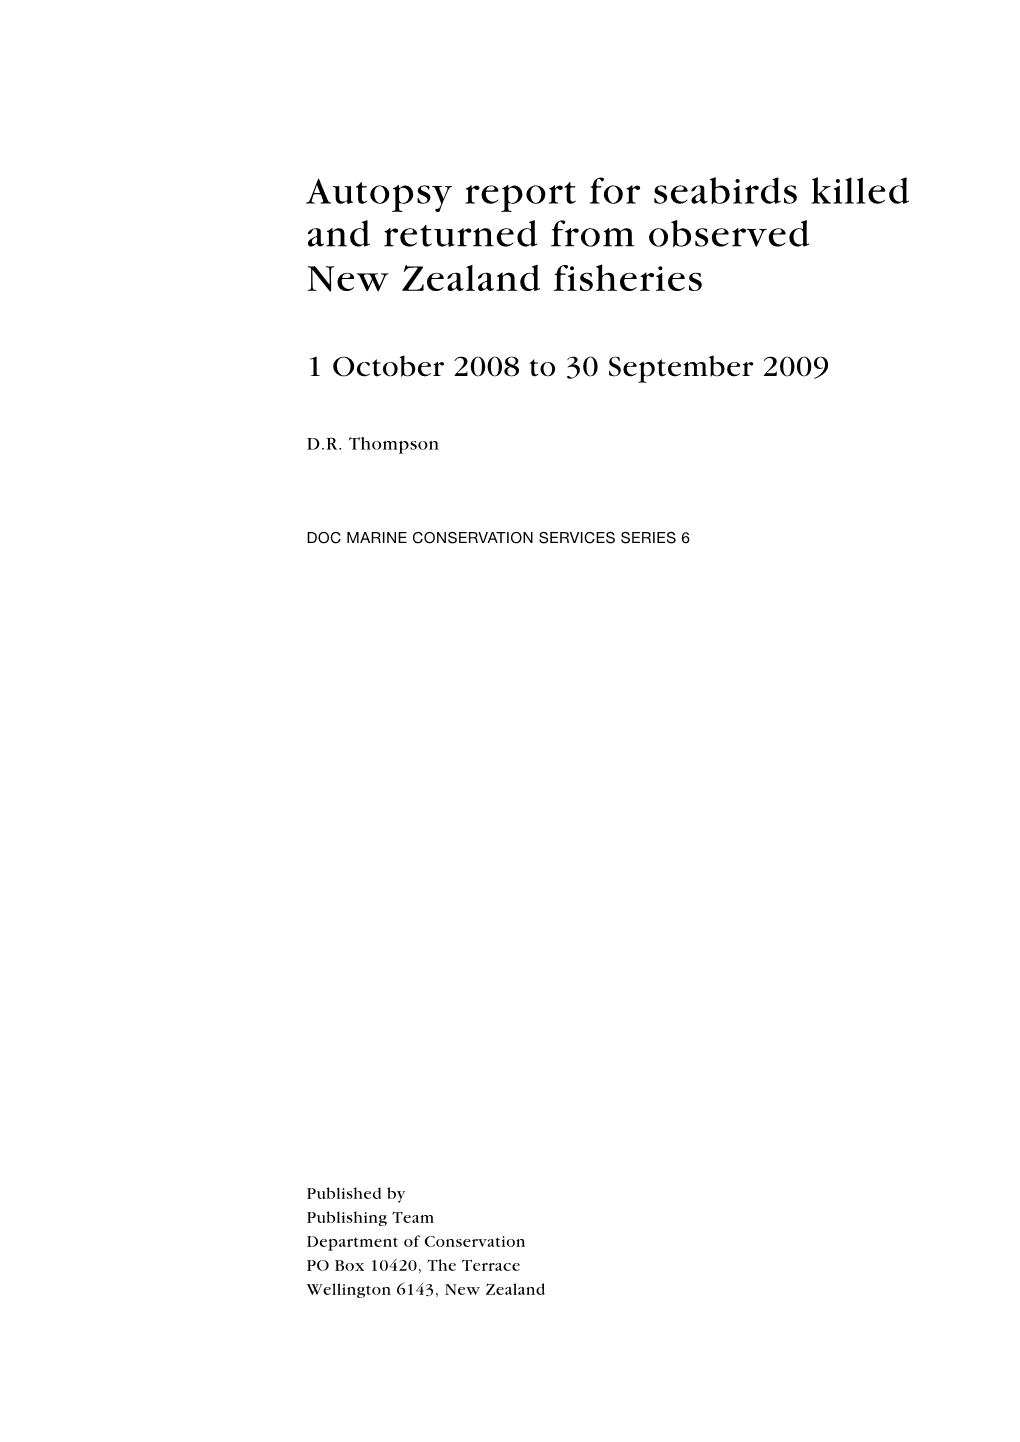 Autopsy Report for Seabirds Killed and Returned from Observed New Zealand Fisheries 1 October 2008 to 30 September 2009